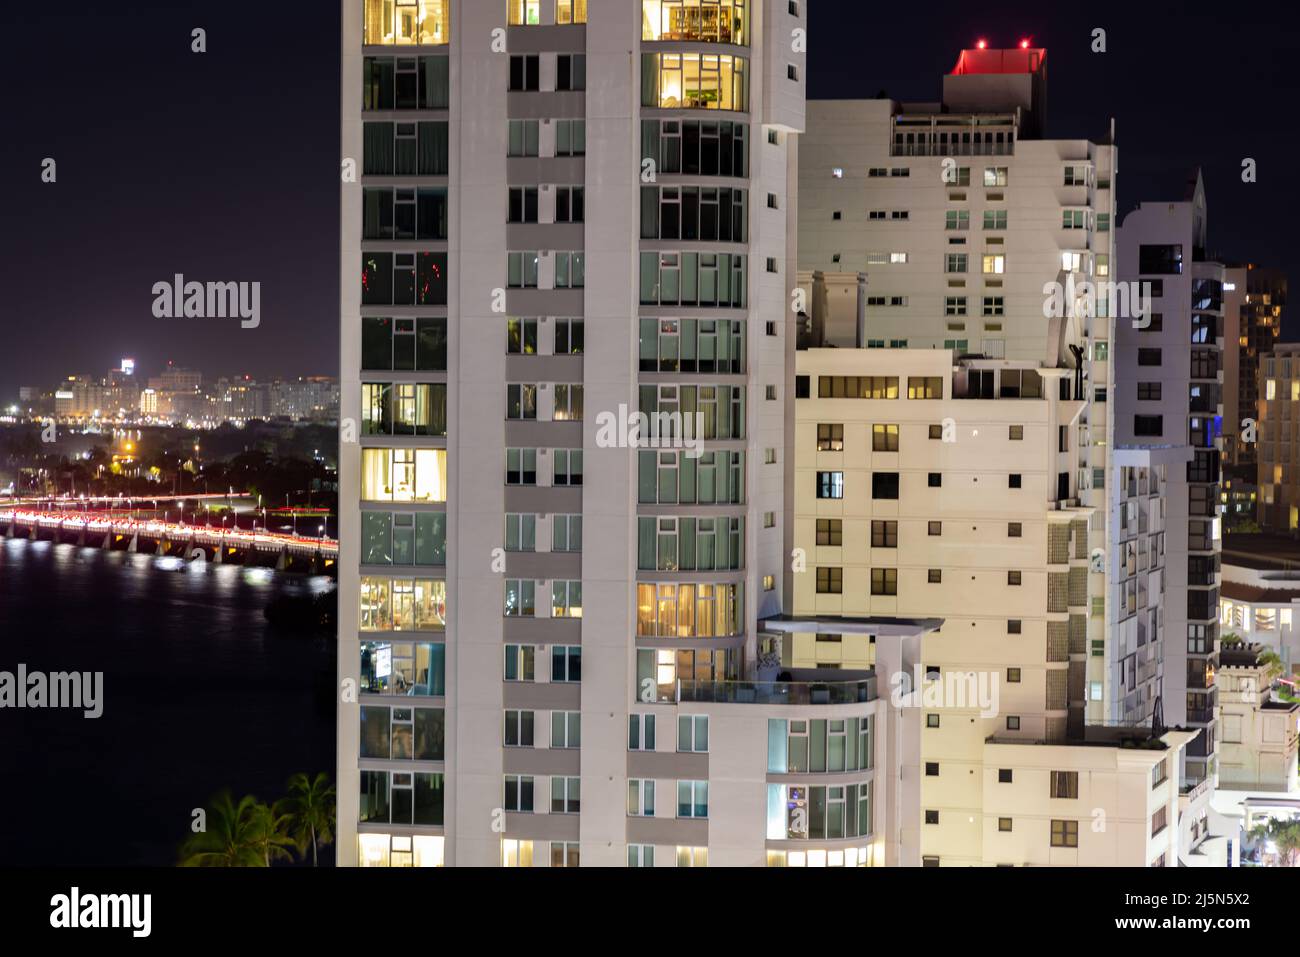 Group of buildings in Condado at night Stock Photo